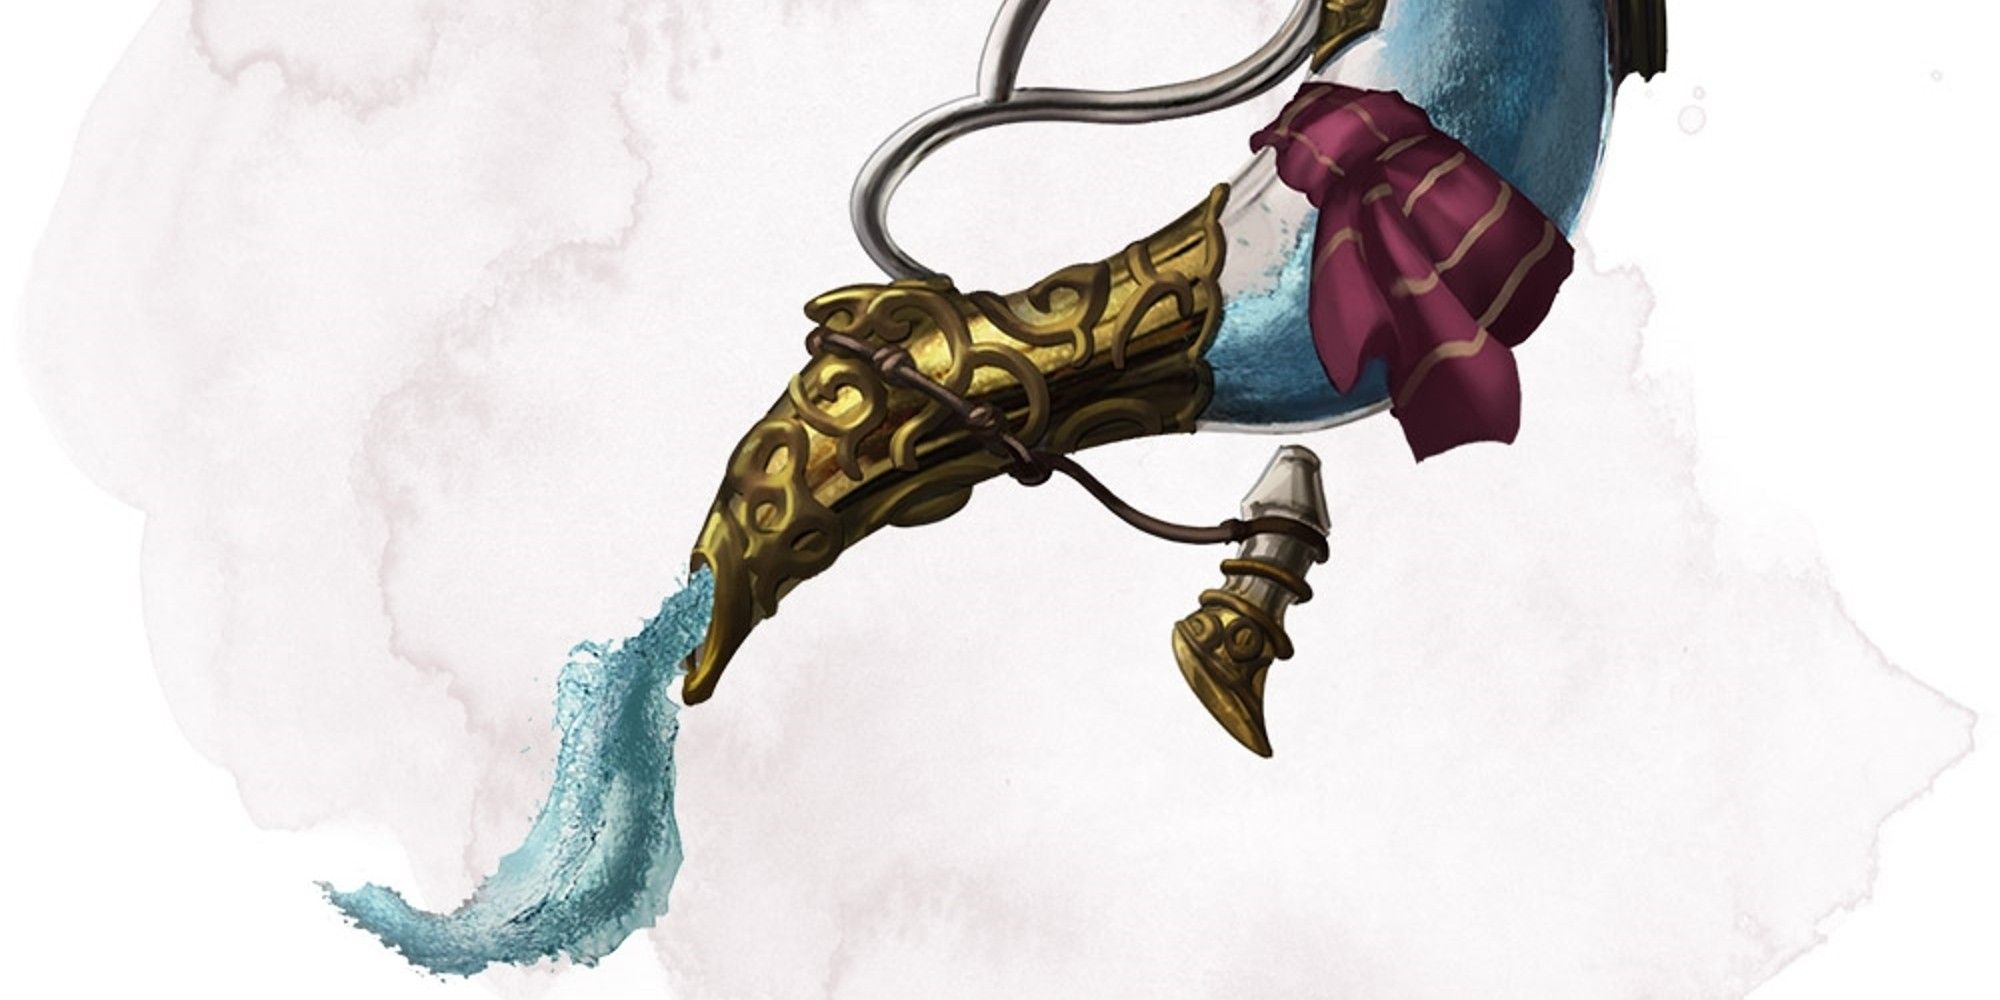 6 D&D Magic Items & Spells That Are Really Just Helping You Break The Rules - A cropped official image of the Dungeons and Dragons item Decanter of Endless Water